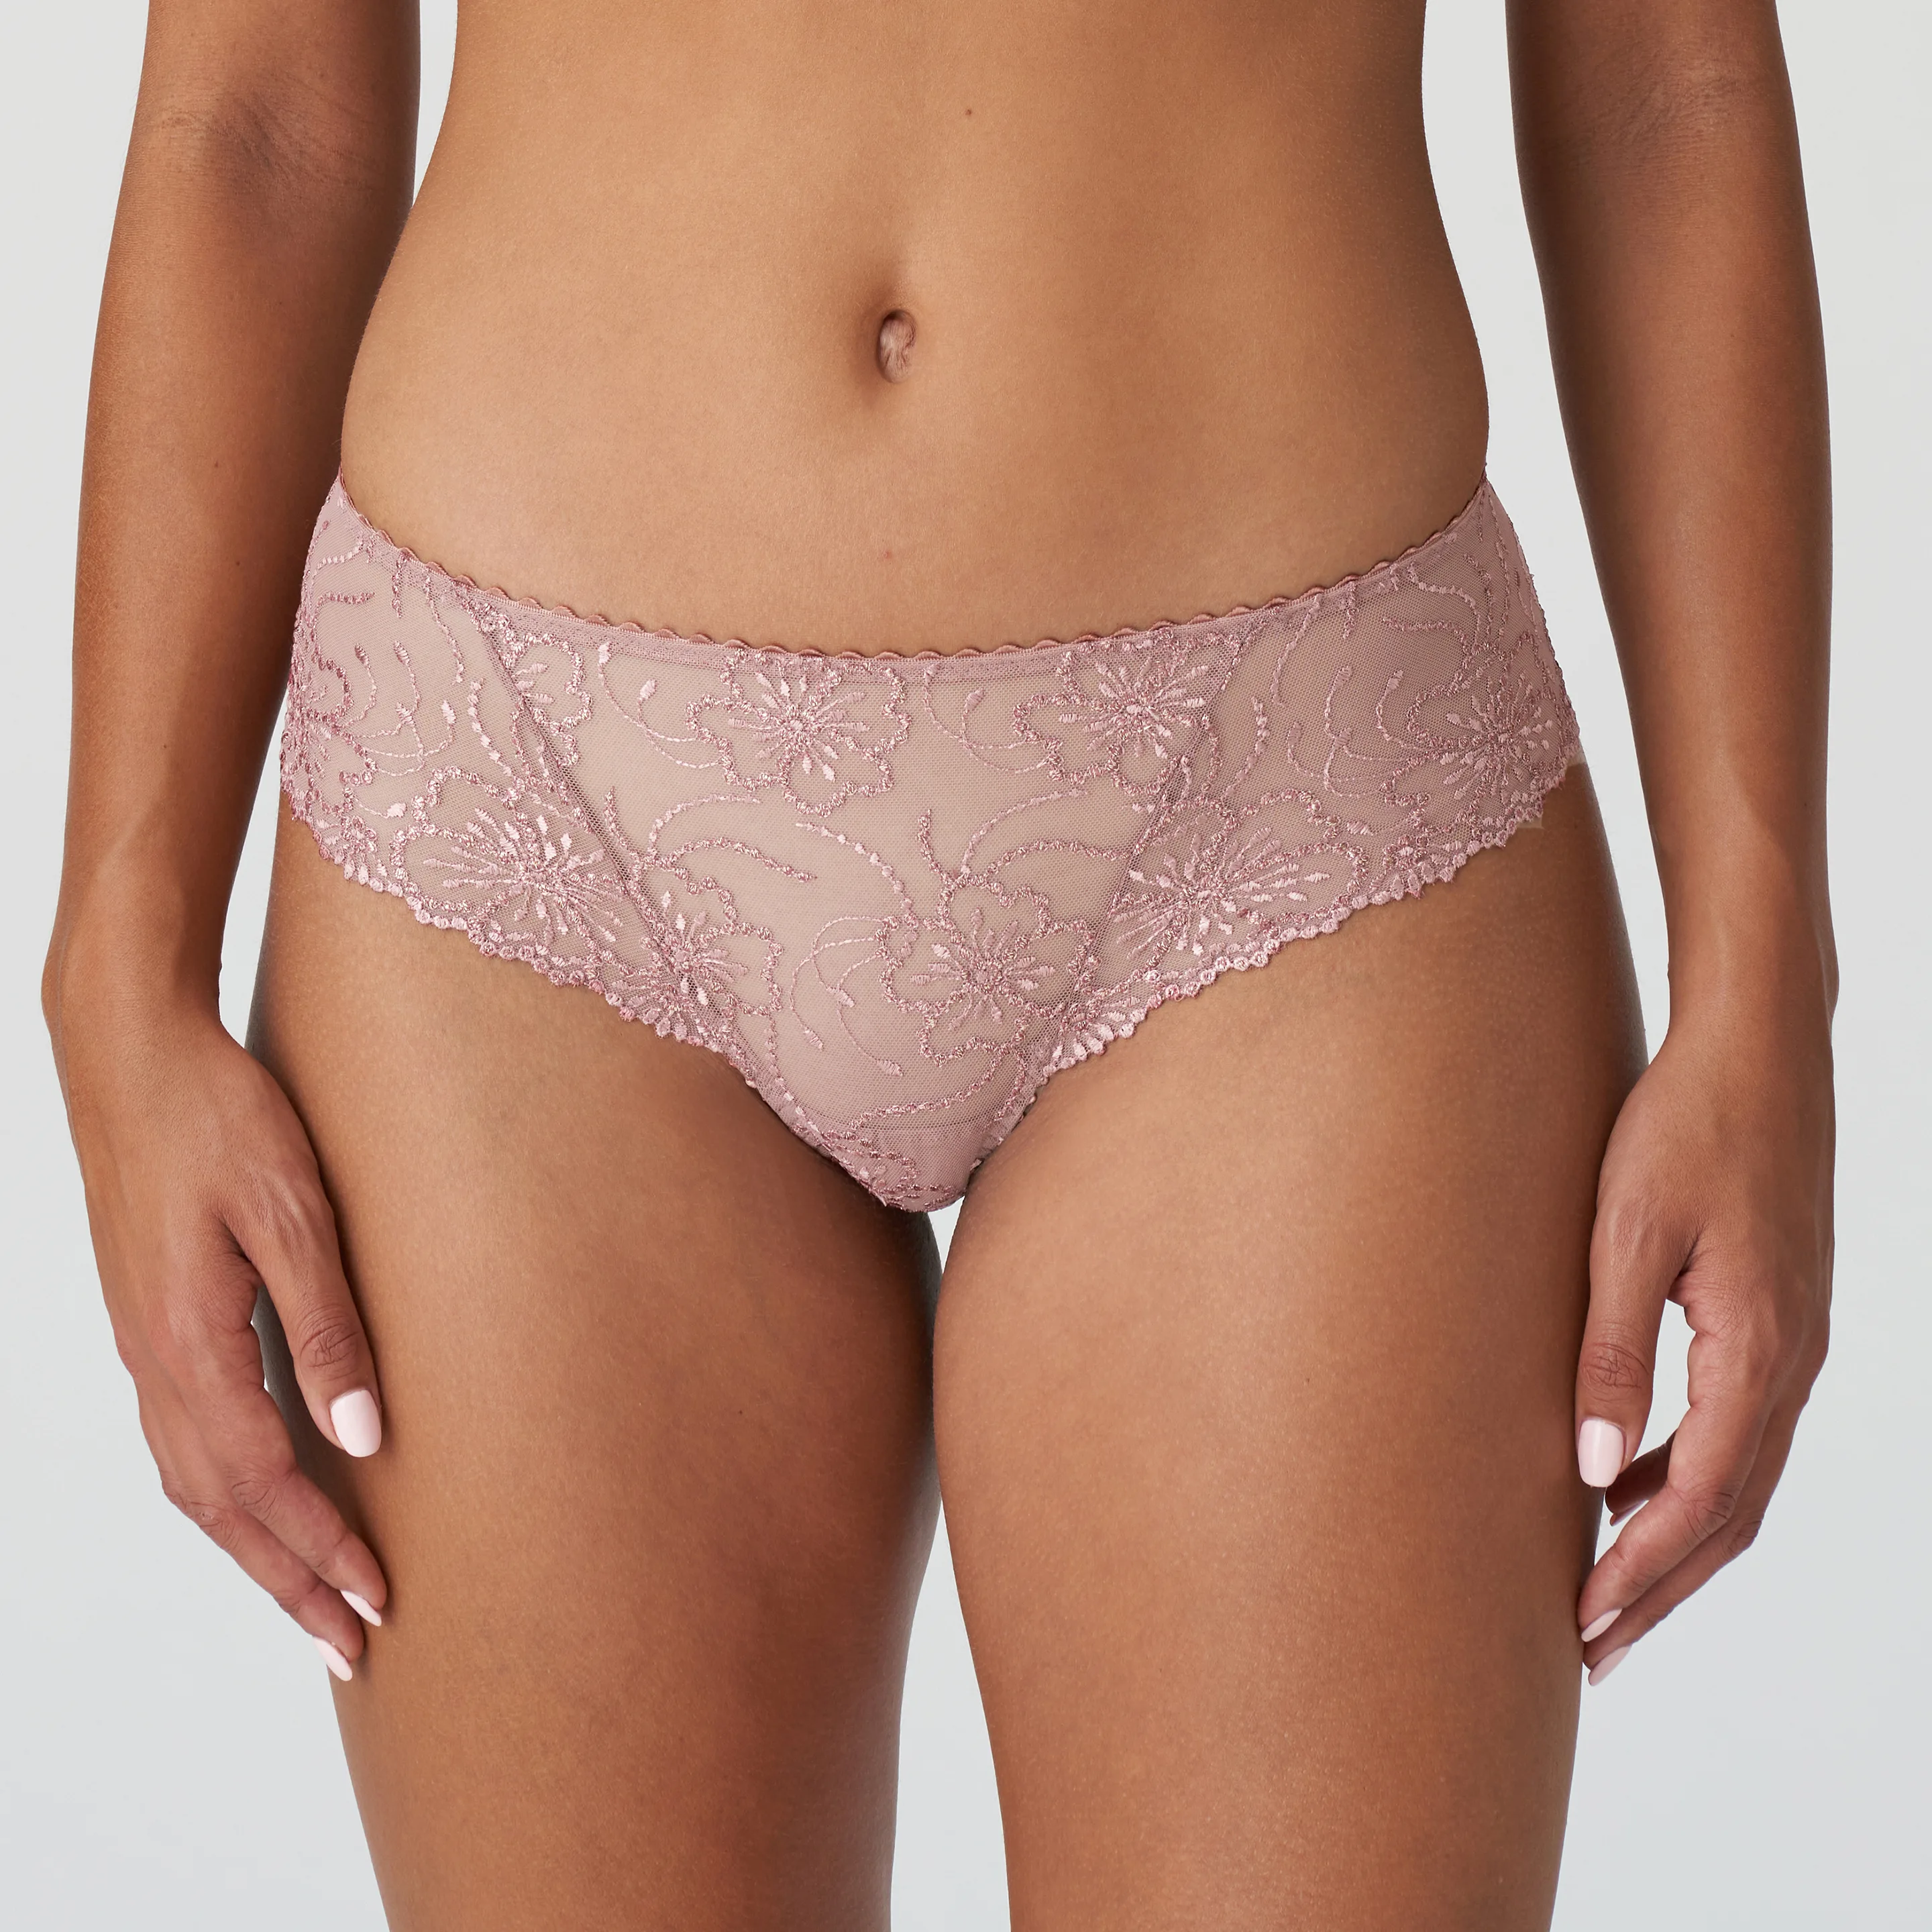 Stylish LLngerie. Fashion Concept. Lacy Underwear for Ladies